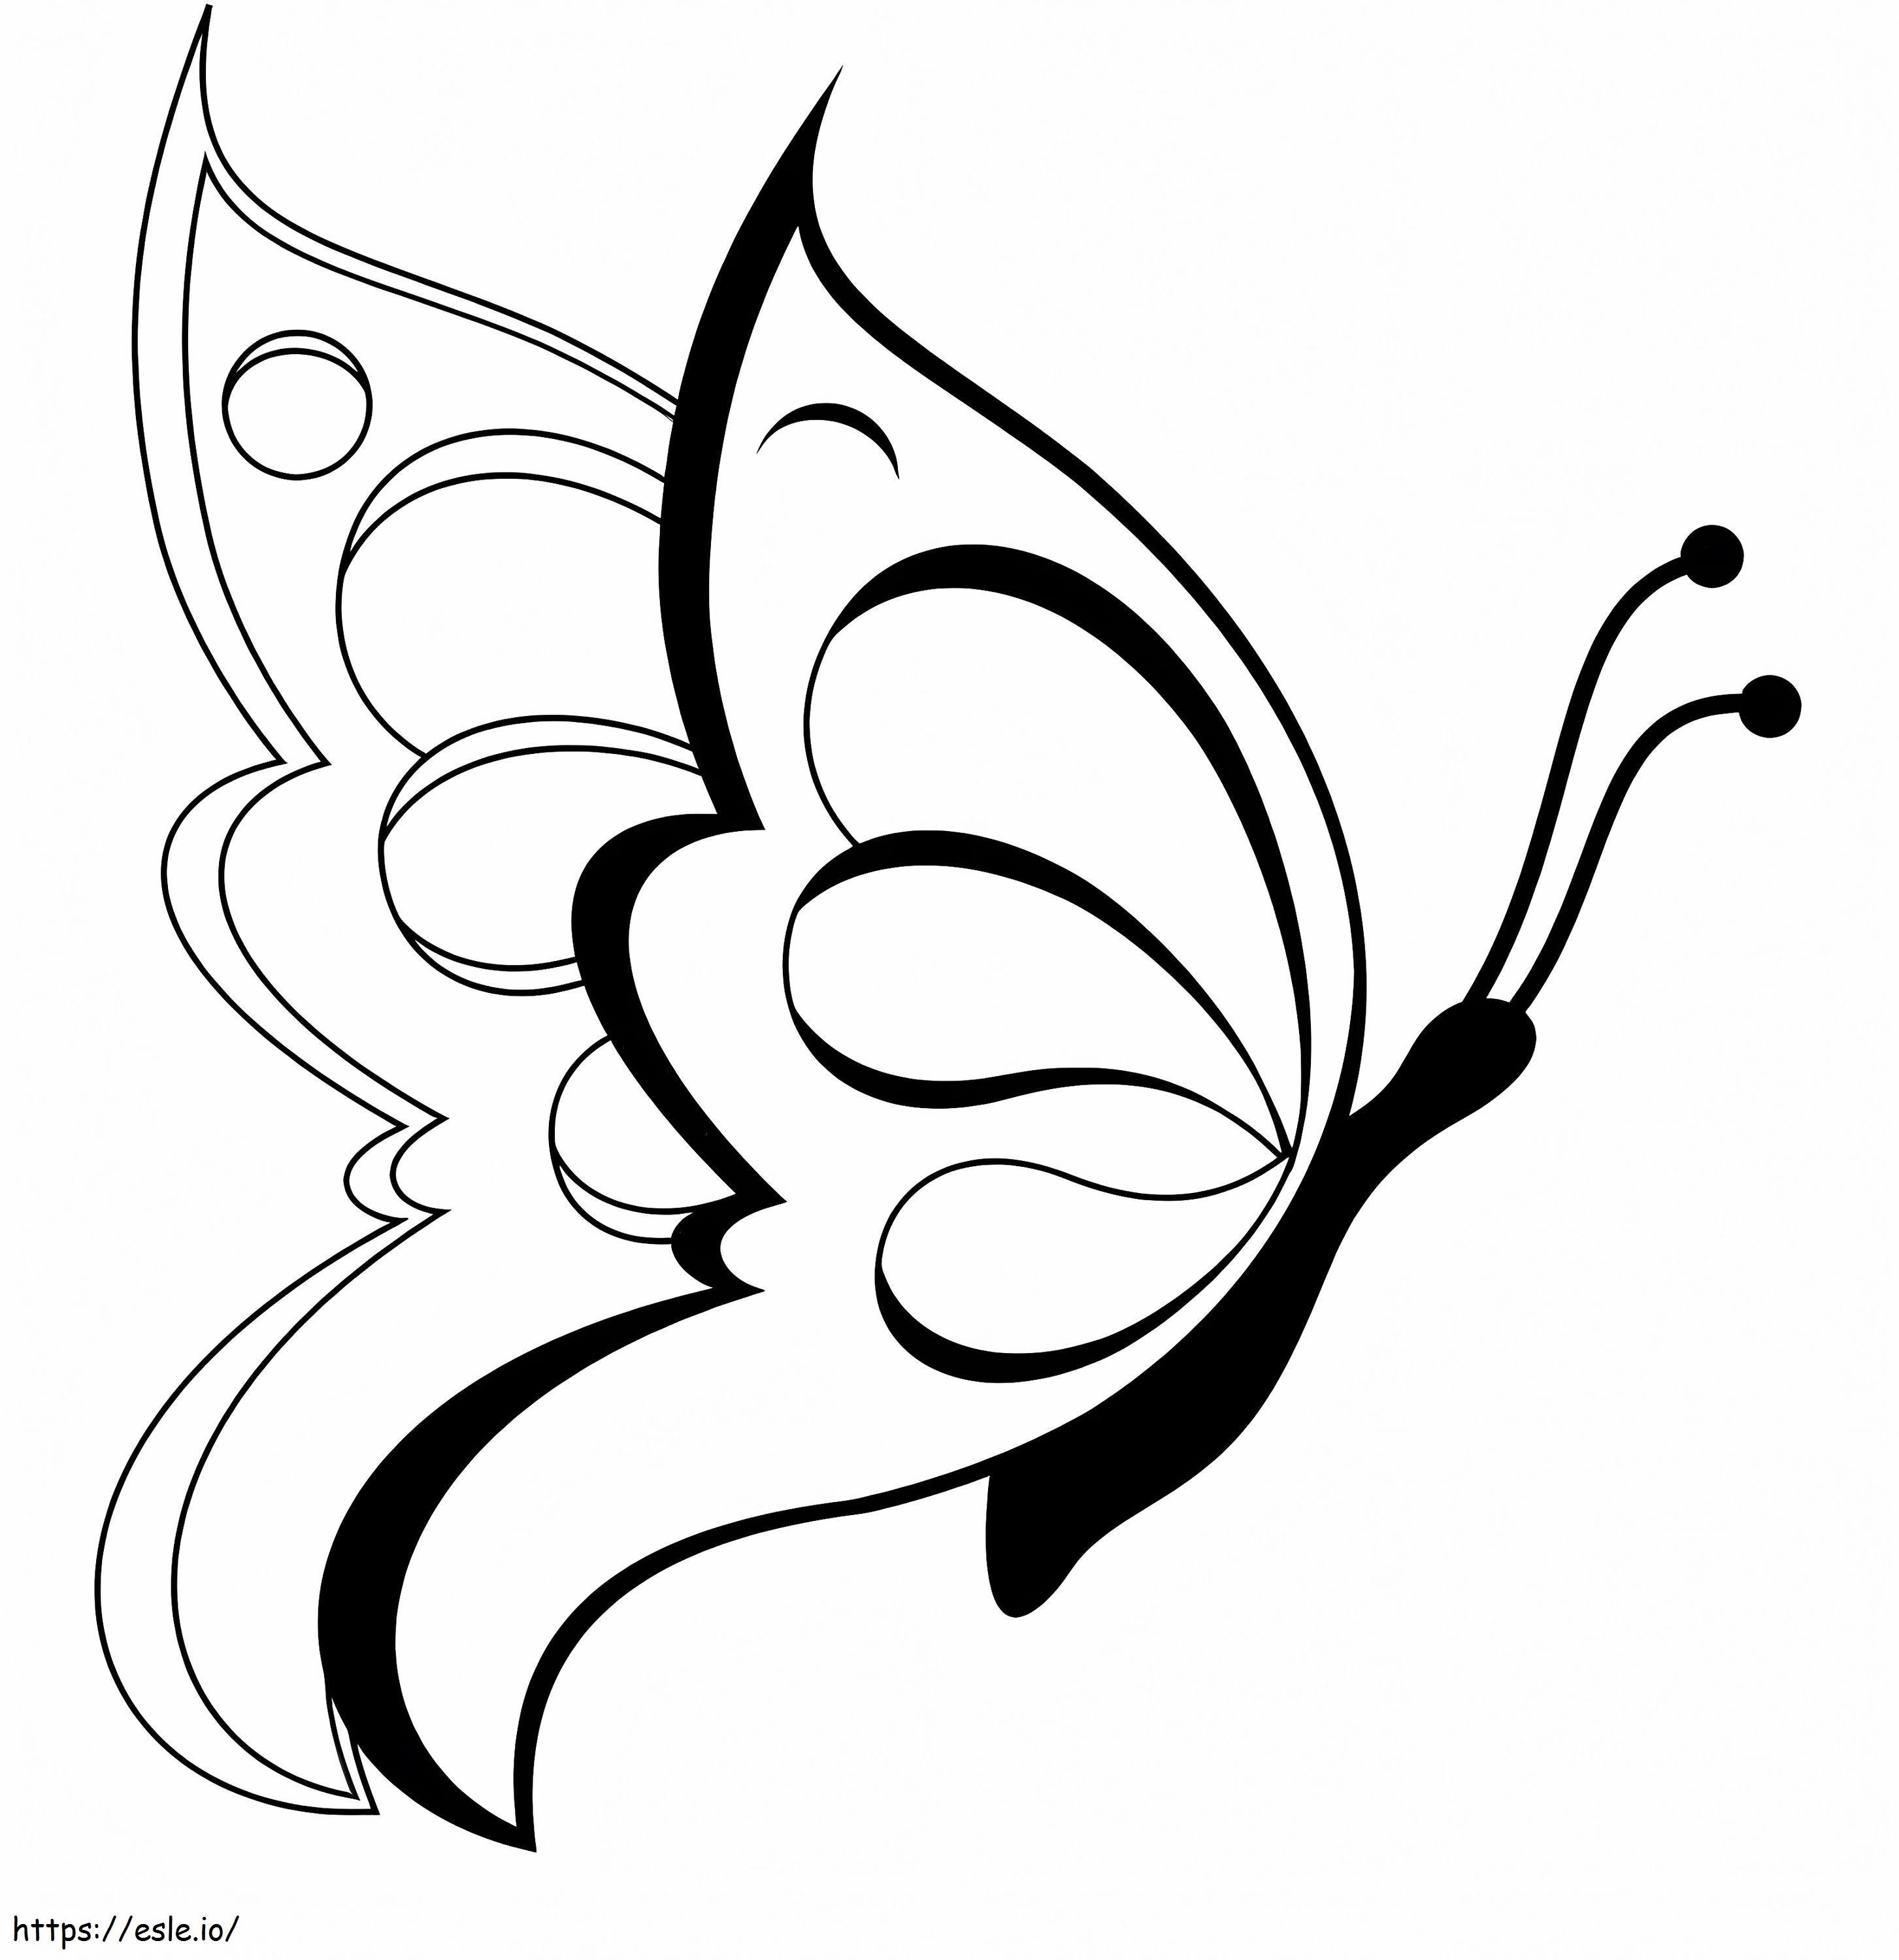 A Butterfly Flies coloring page